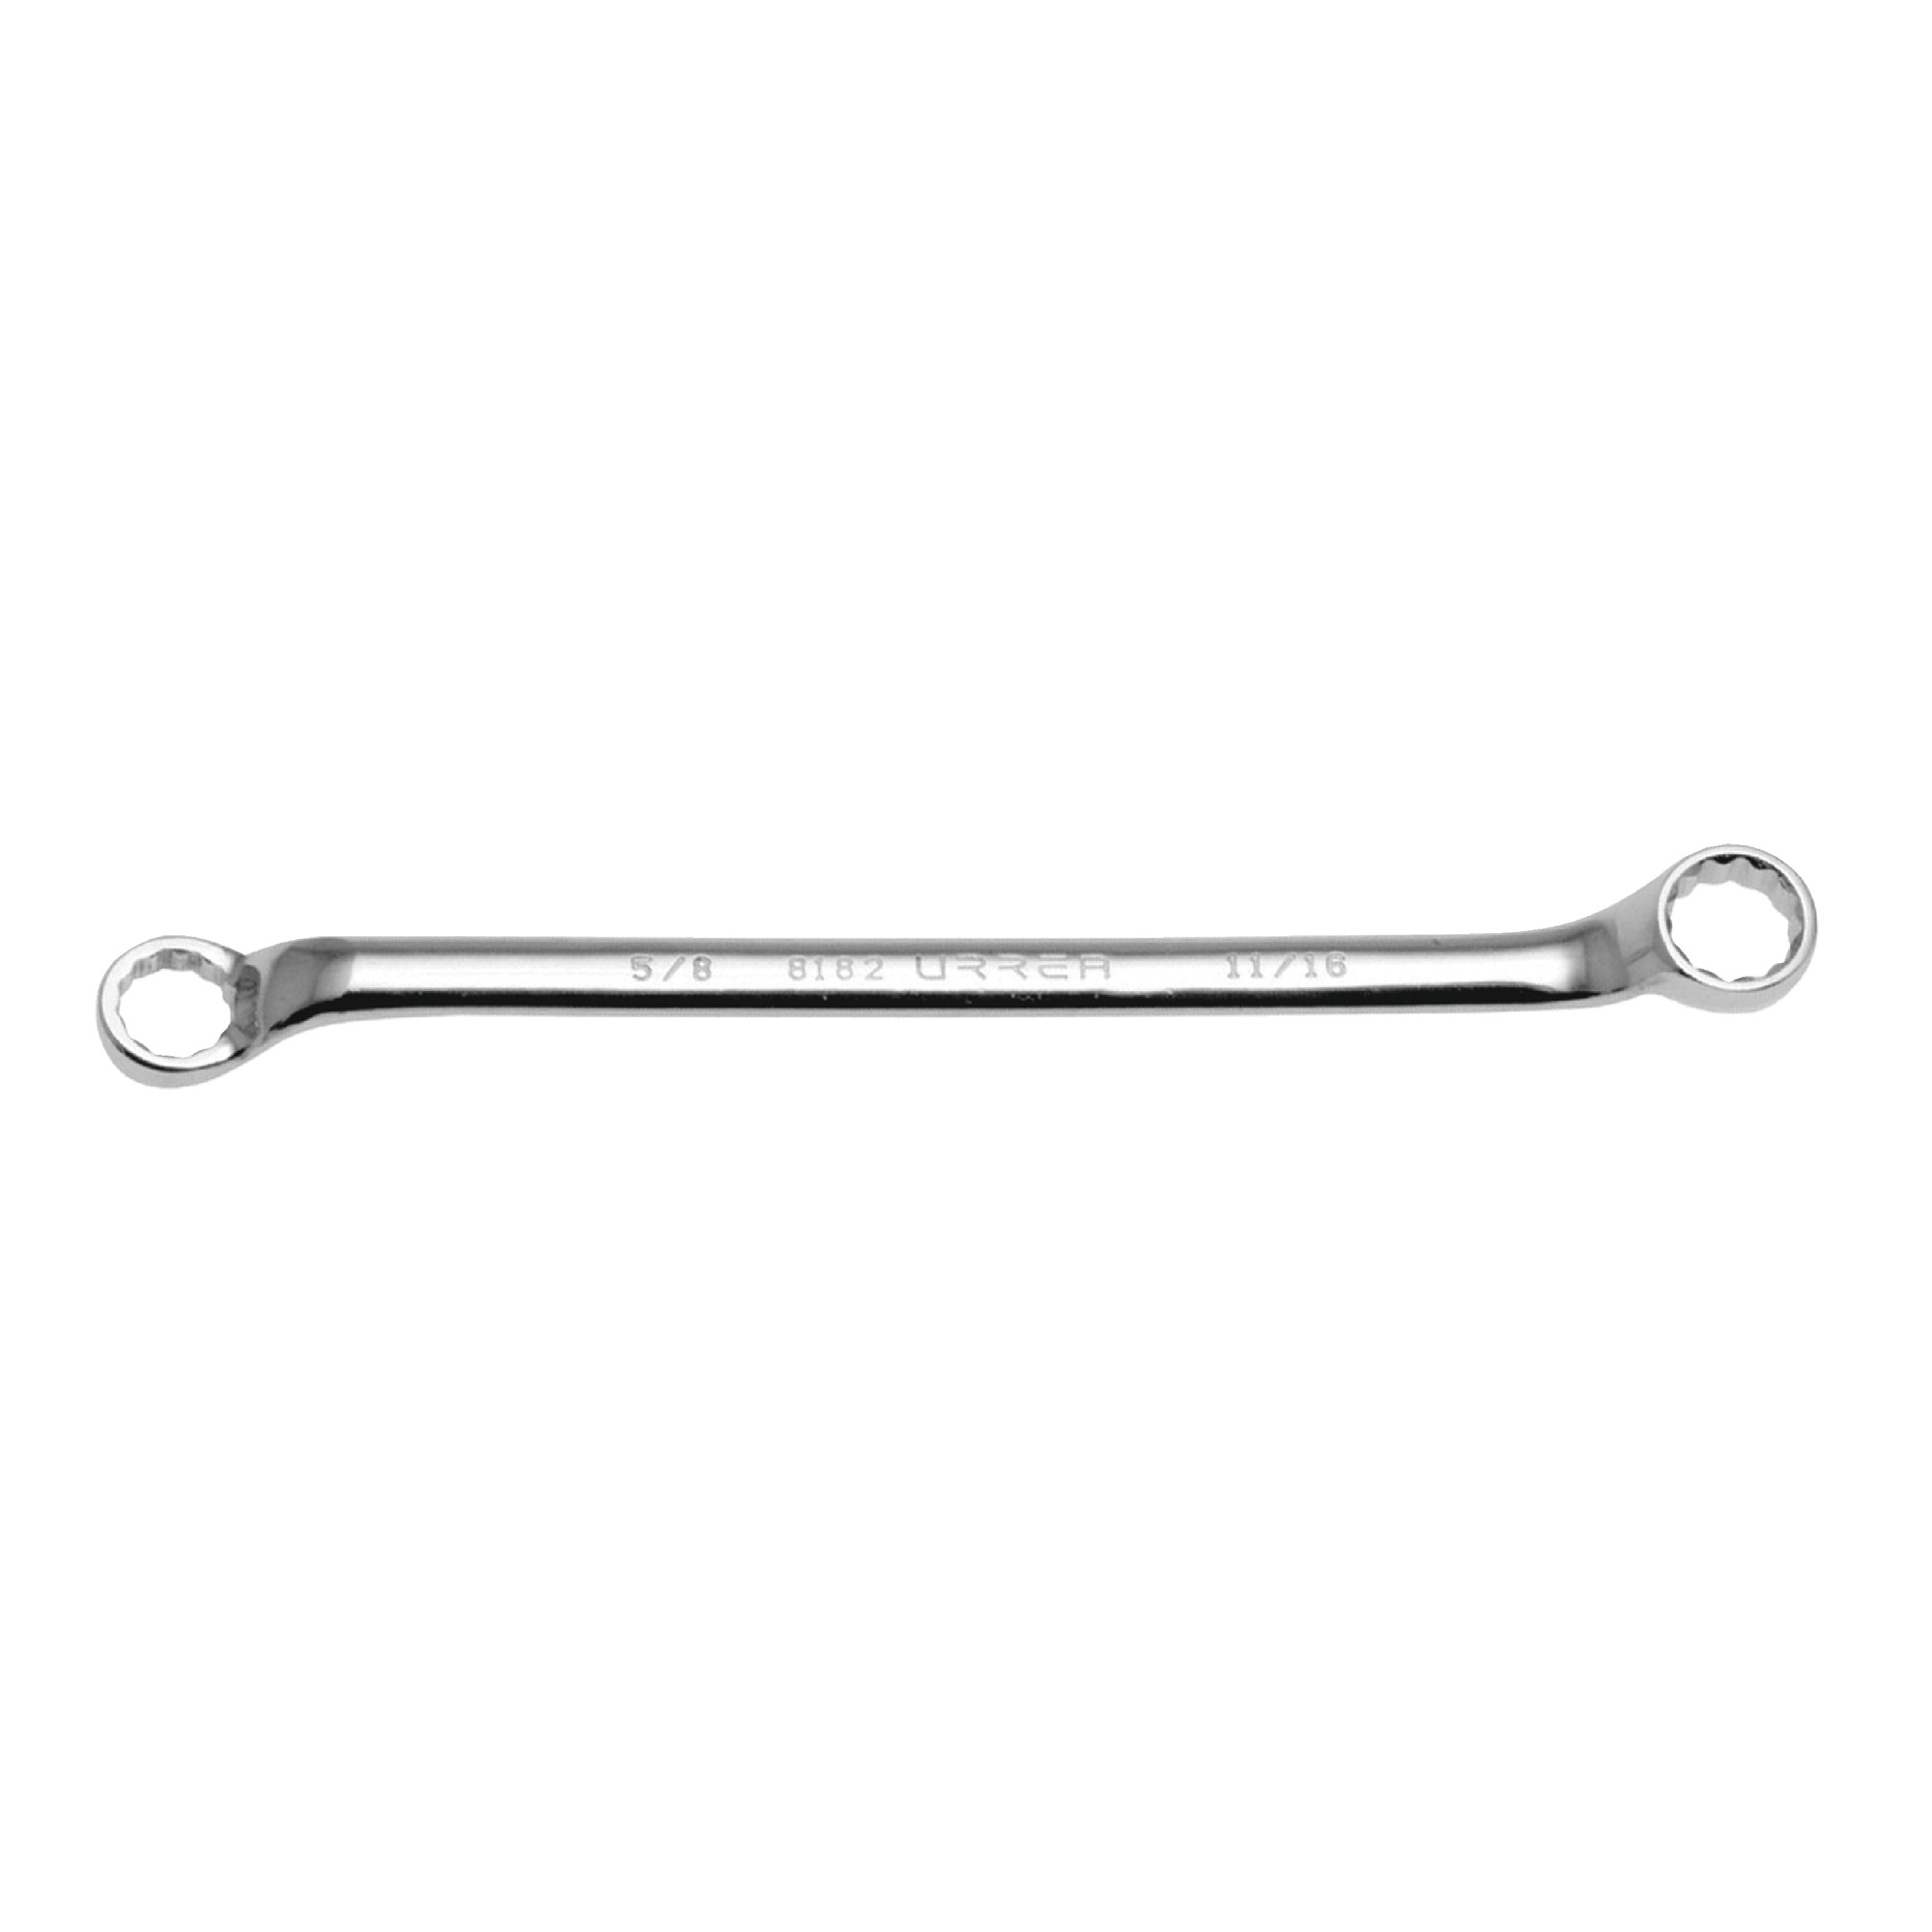 81215 12mm x 15mm Chrome Finish 12 Point Box Wrench